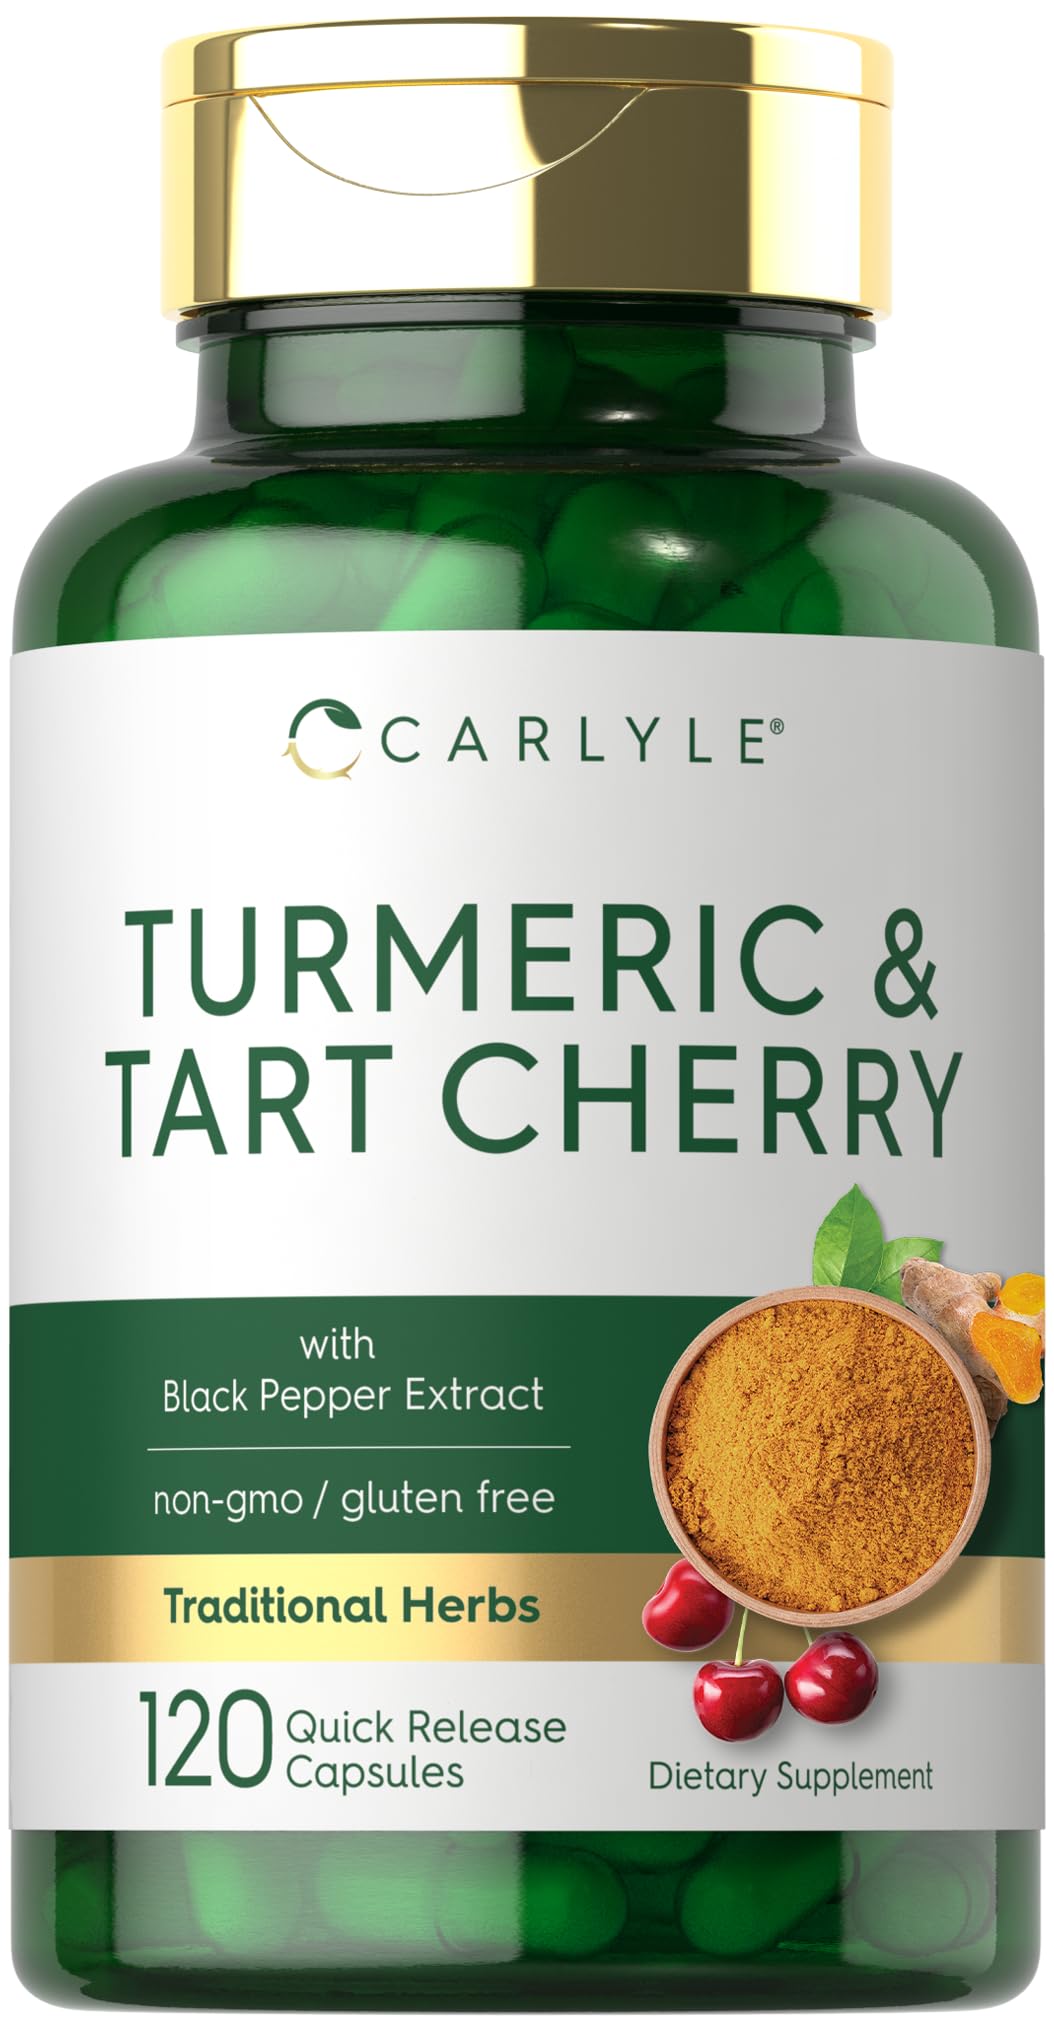 Carlyle Turmeric and Tart Cherry Capsules 120 Count